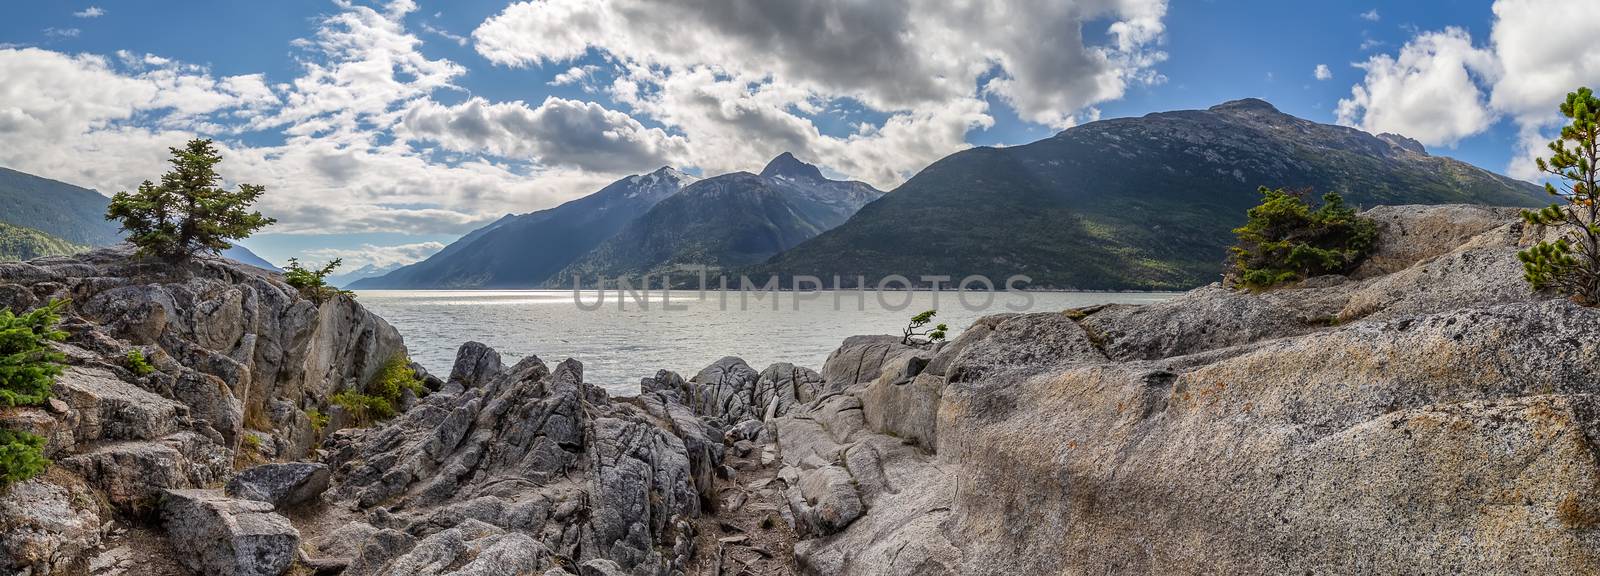 Panoramic shot from Yucatania point near Skagway, Alaska. Rocky terrain as a foreground. Mountains and cloudy blue sky as a background.